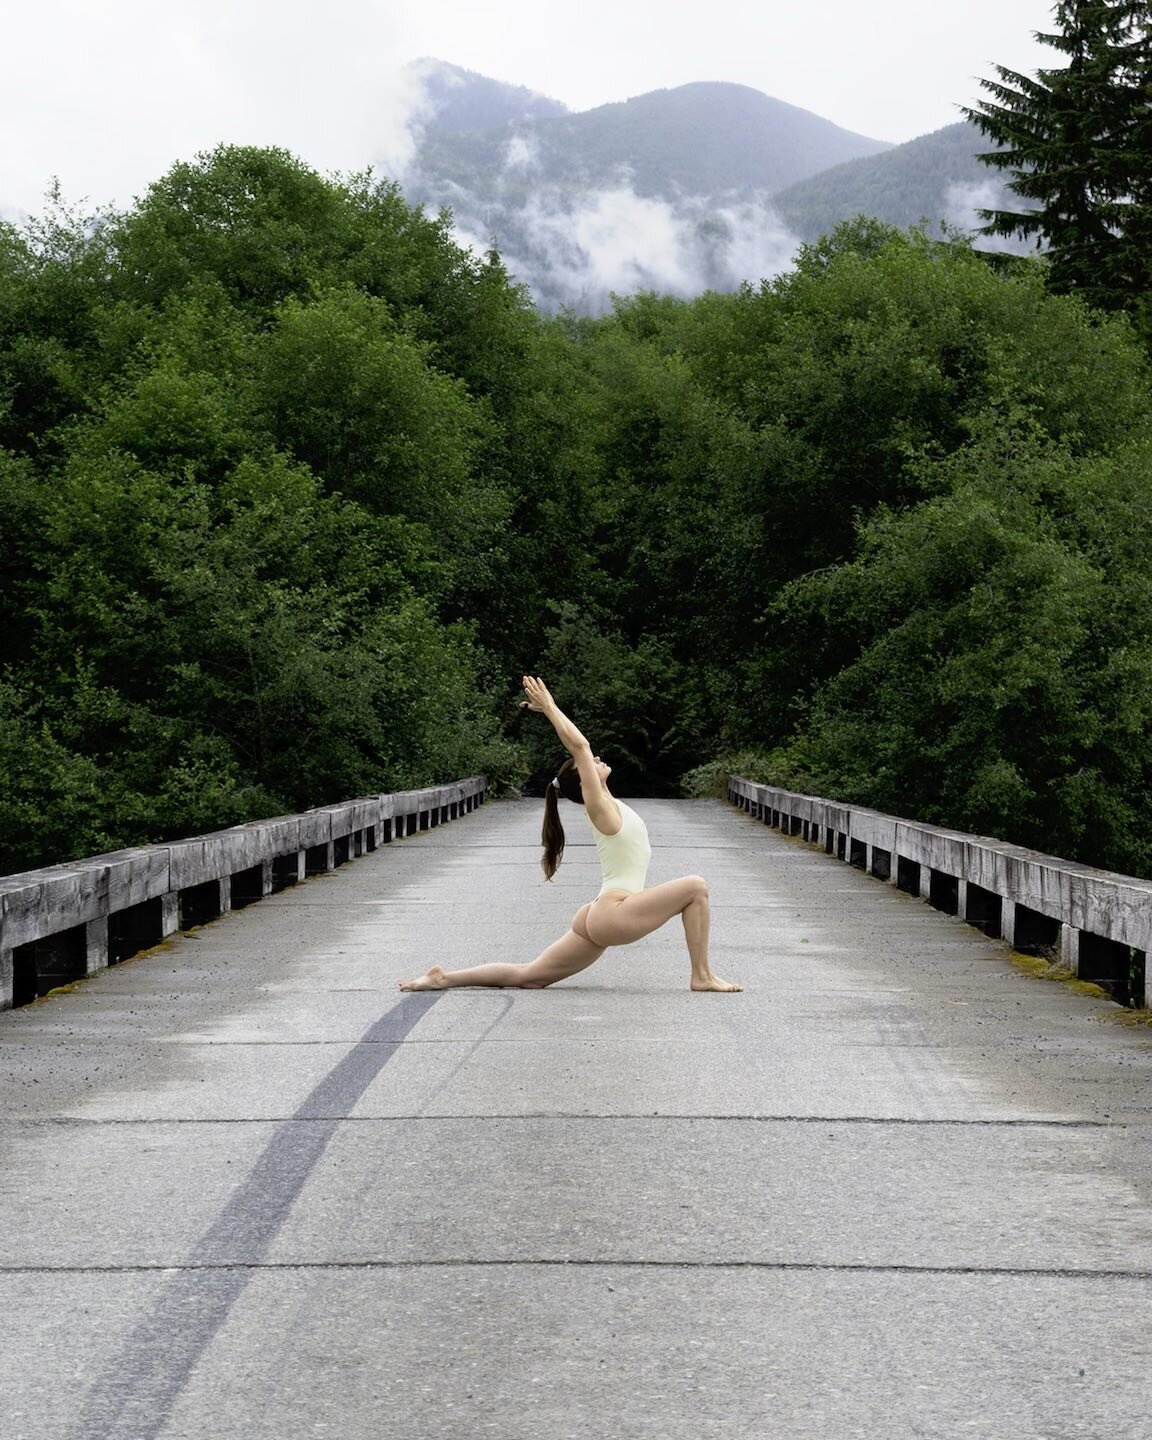 Crescent Lunge &mdash; Anjaneyasana (AHN-jah-nay-AHS-uh-nuh) &mdash; is a dynamic standing yoga pose that helps the front of the body to expand, which increases energy and reduces fatigue. The low-lunge helps open your chest, groin and thighs. It is 